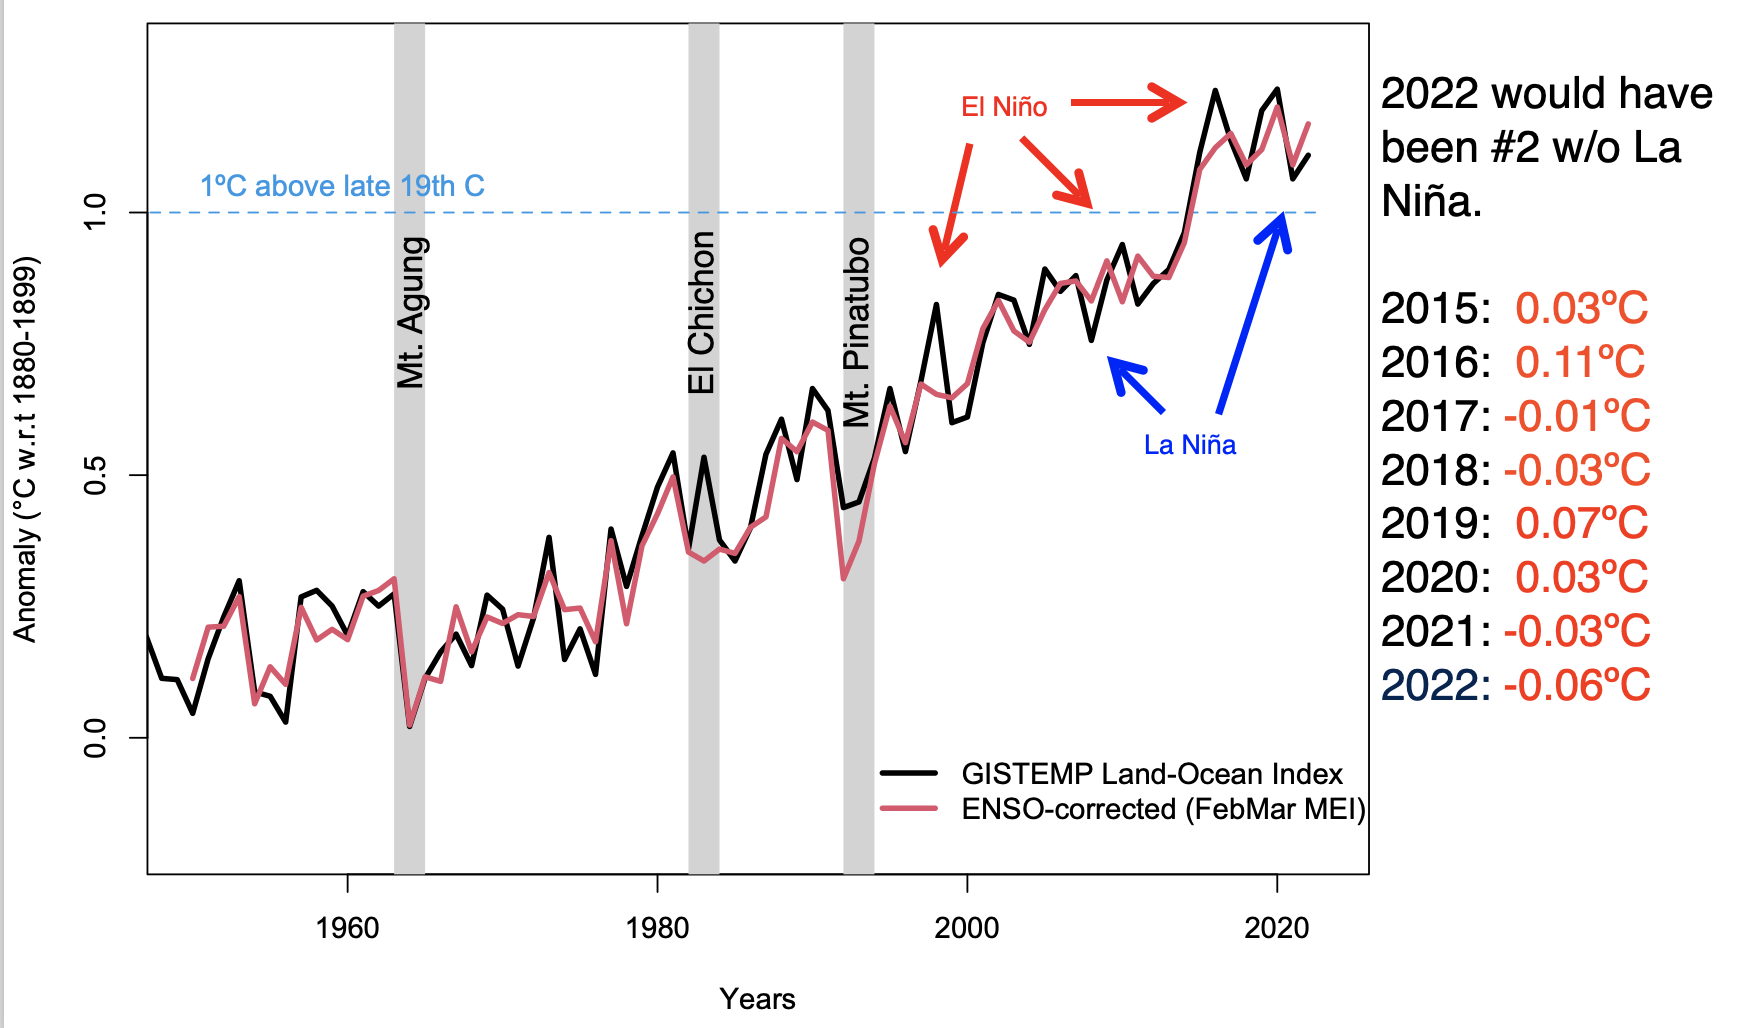 GISTEMP and and ENSO-corrected version of the time series